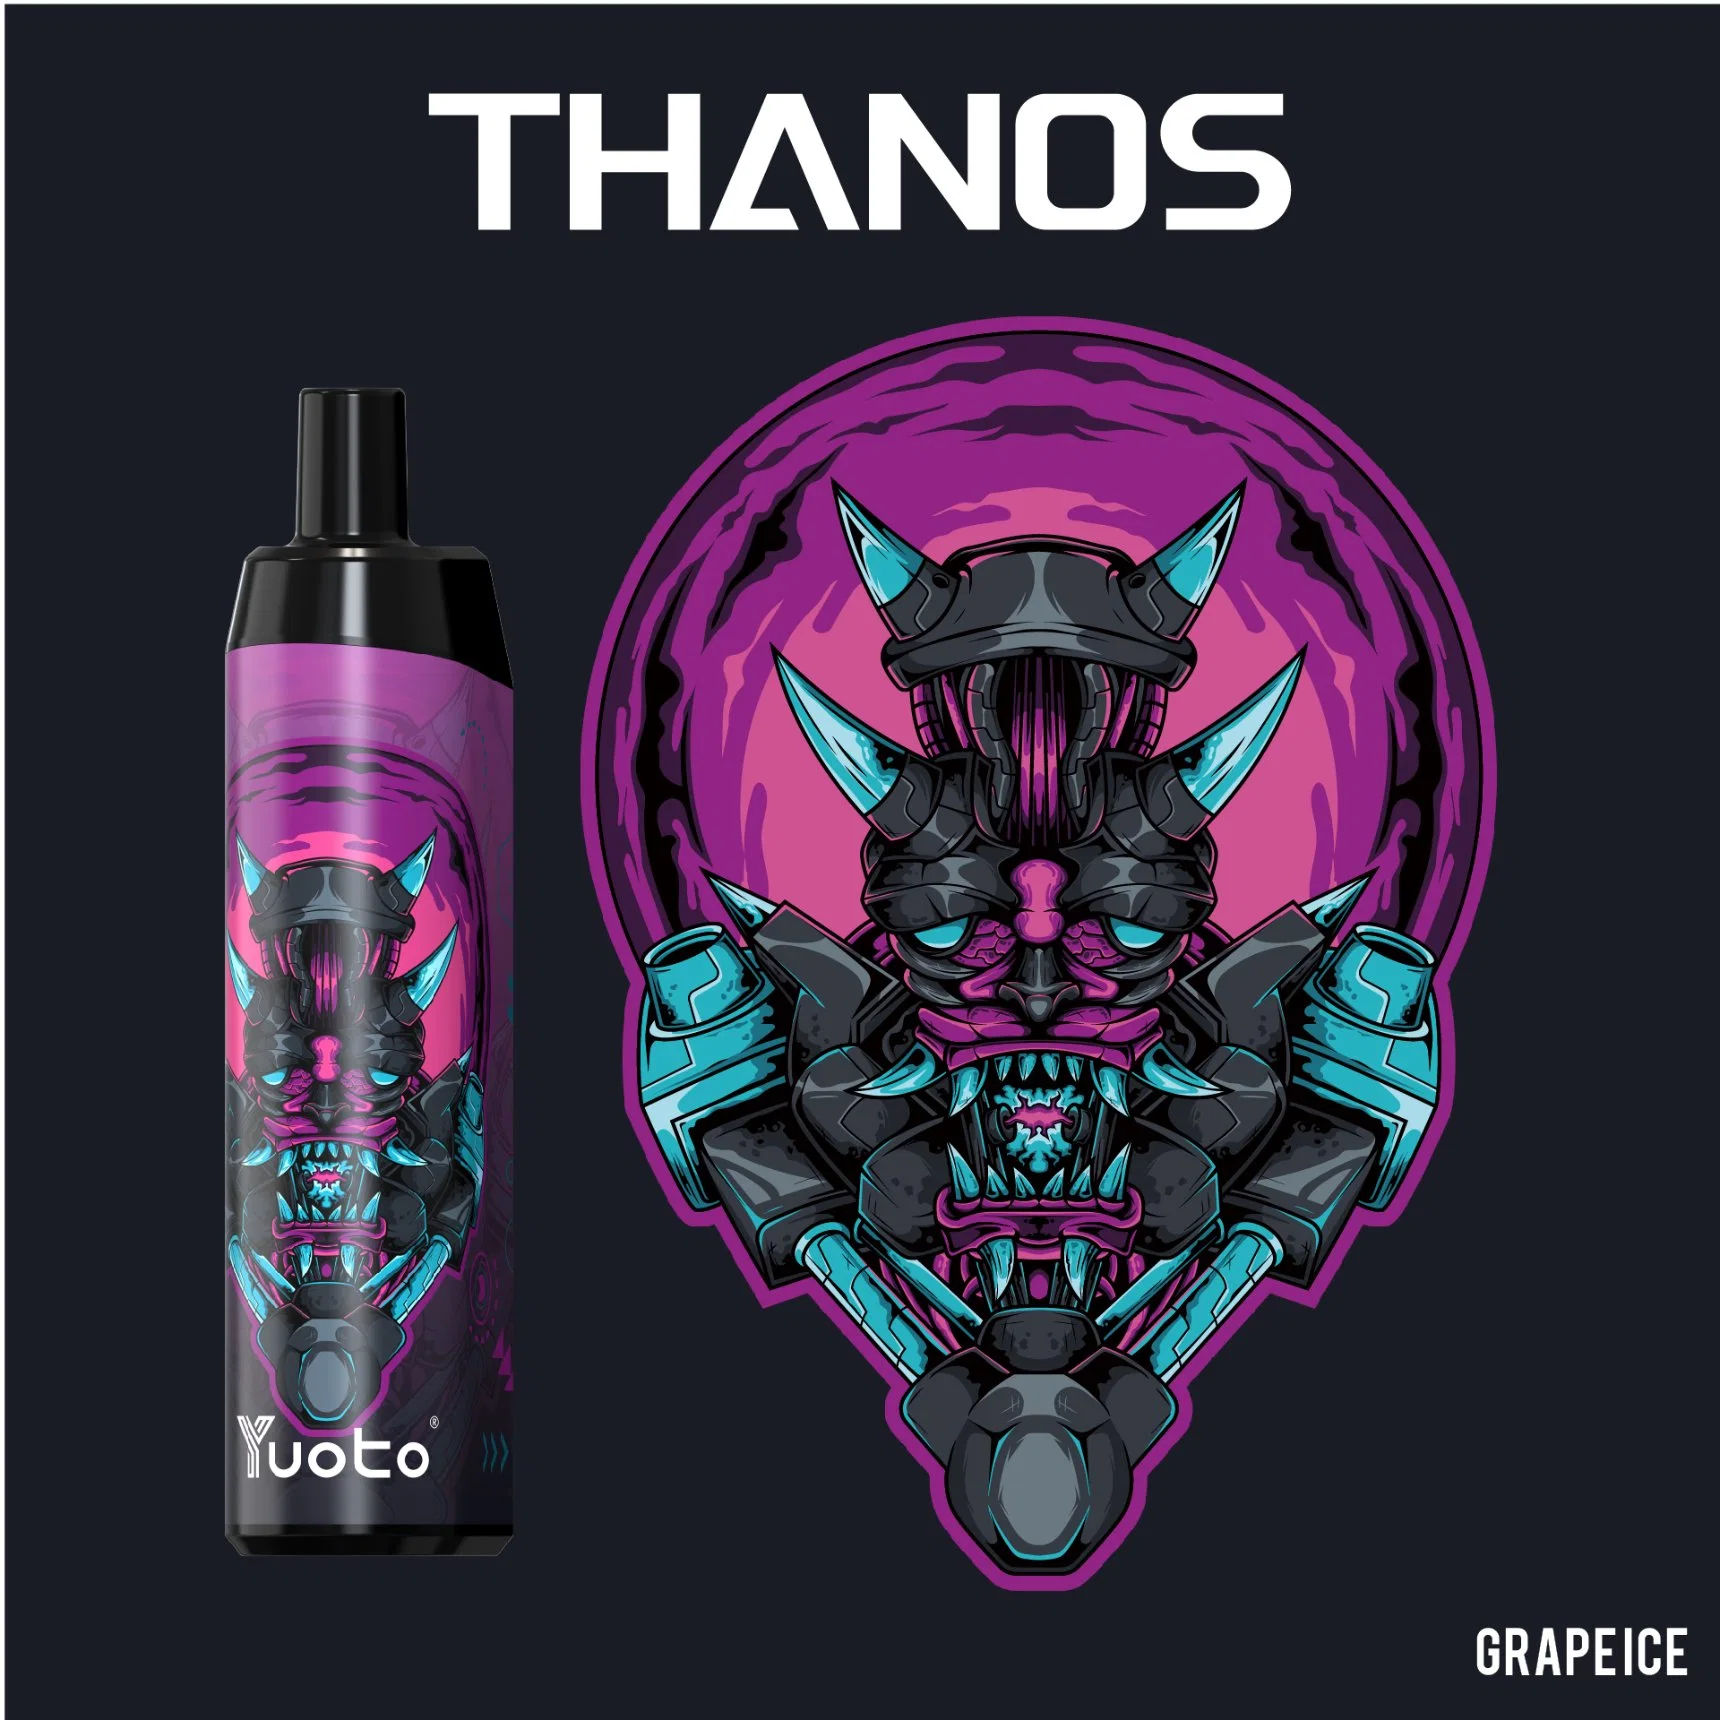 Yuoto Thanos 5000 Puffs 5% Nicotine 14ml E Liquid 650mAh Battery Mesh Coil Rechargeable with Type vape